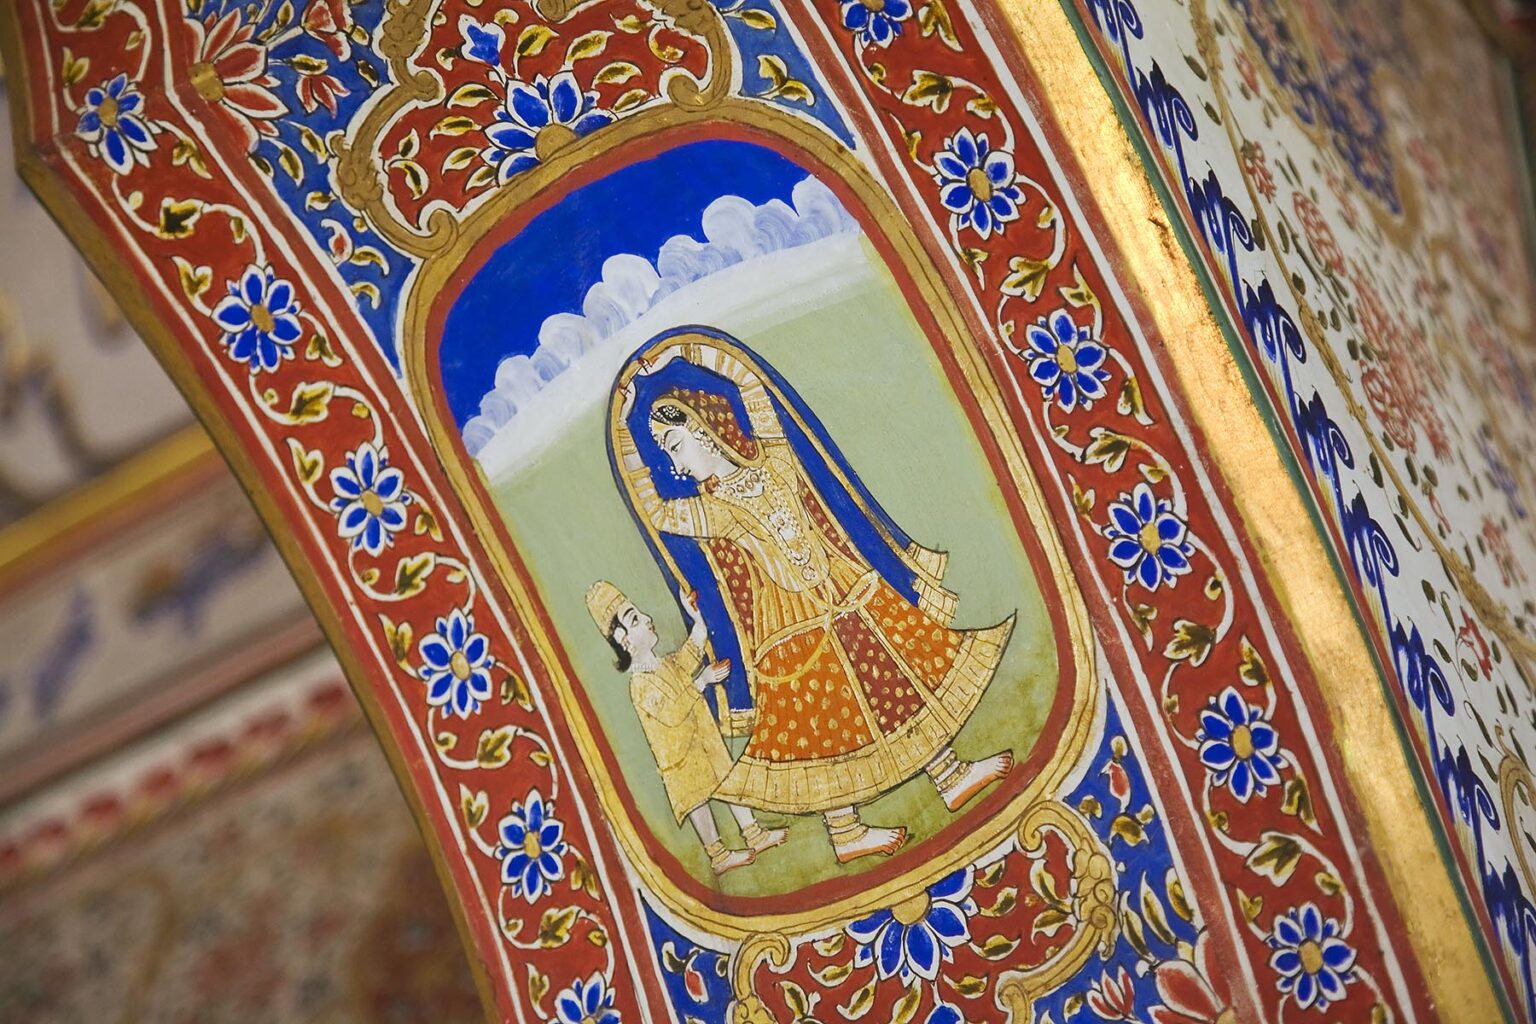 Hand Painted ARCHWAY of Rajasthani Princess in the AKHEY VILLA inside the MAHARAJA'S PALACE located in JAISALMER FORT - RAJASTHAN, INDIA